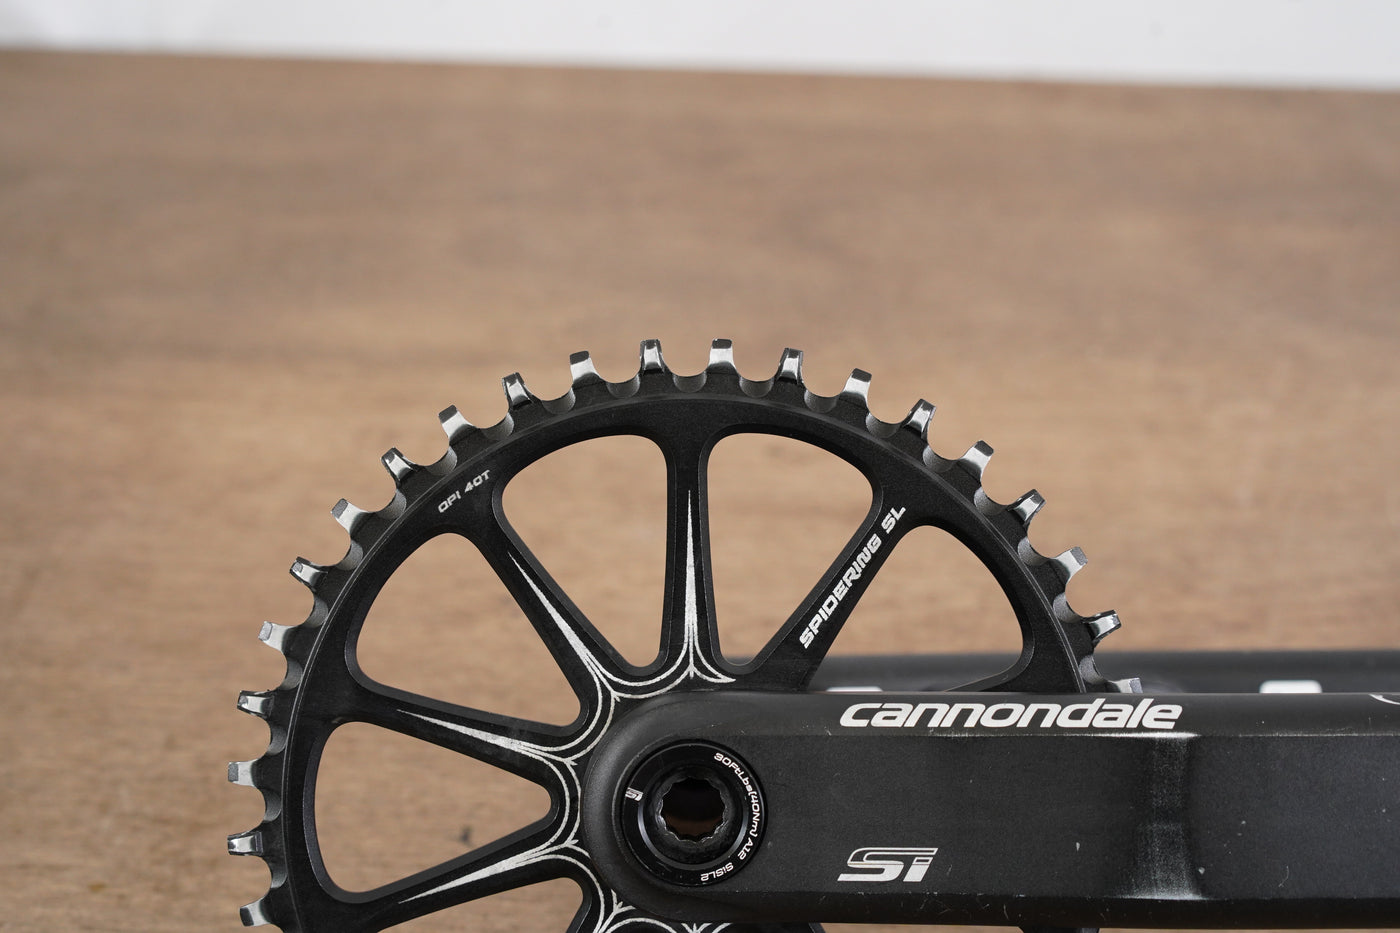 175mm 40T BB30 Cannondale Si Spidering Hollowgram Stages Power Meter 537g